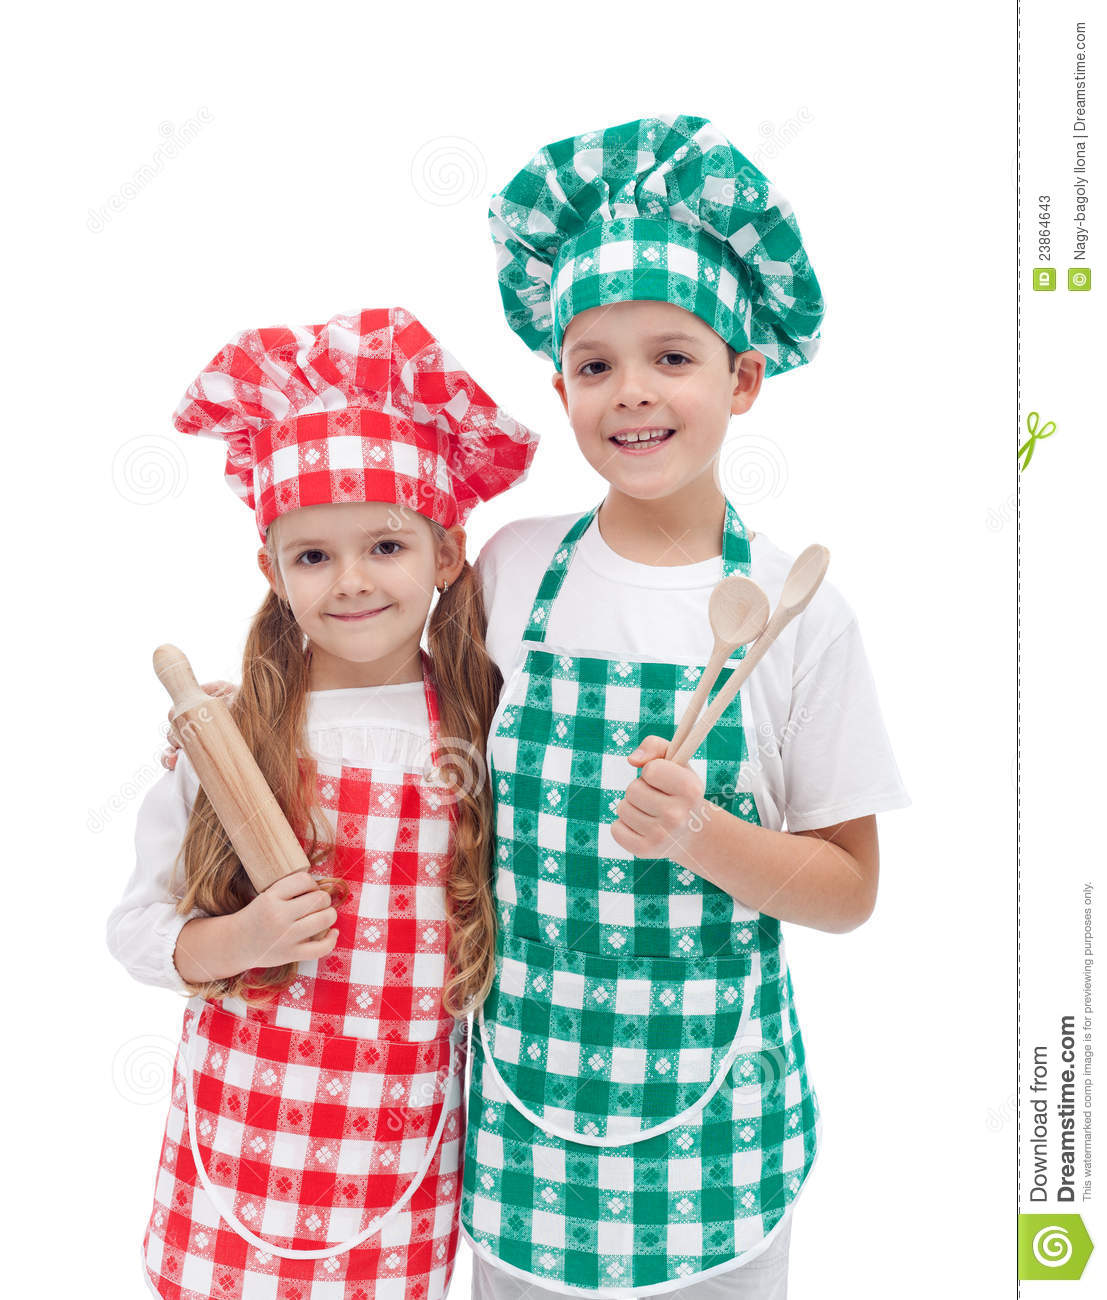 Happy Kid Chefs With Wooden Cooking Utensils Stock Photos   Image